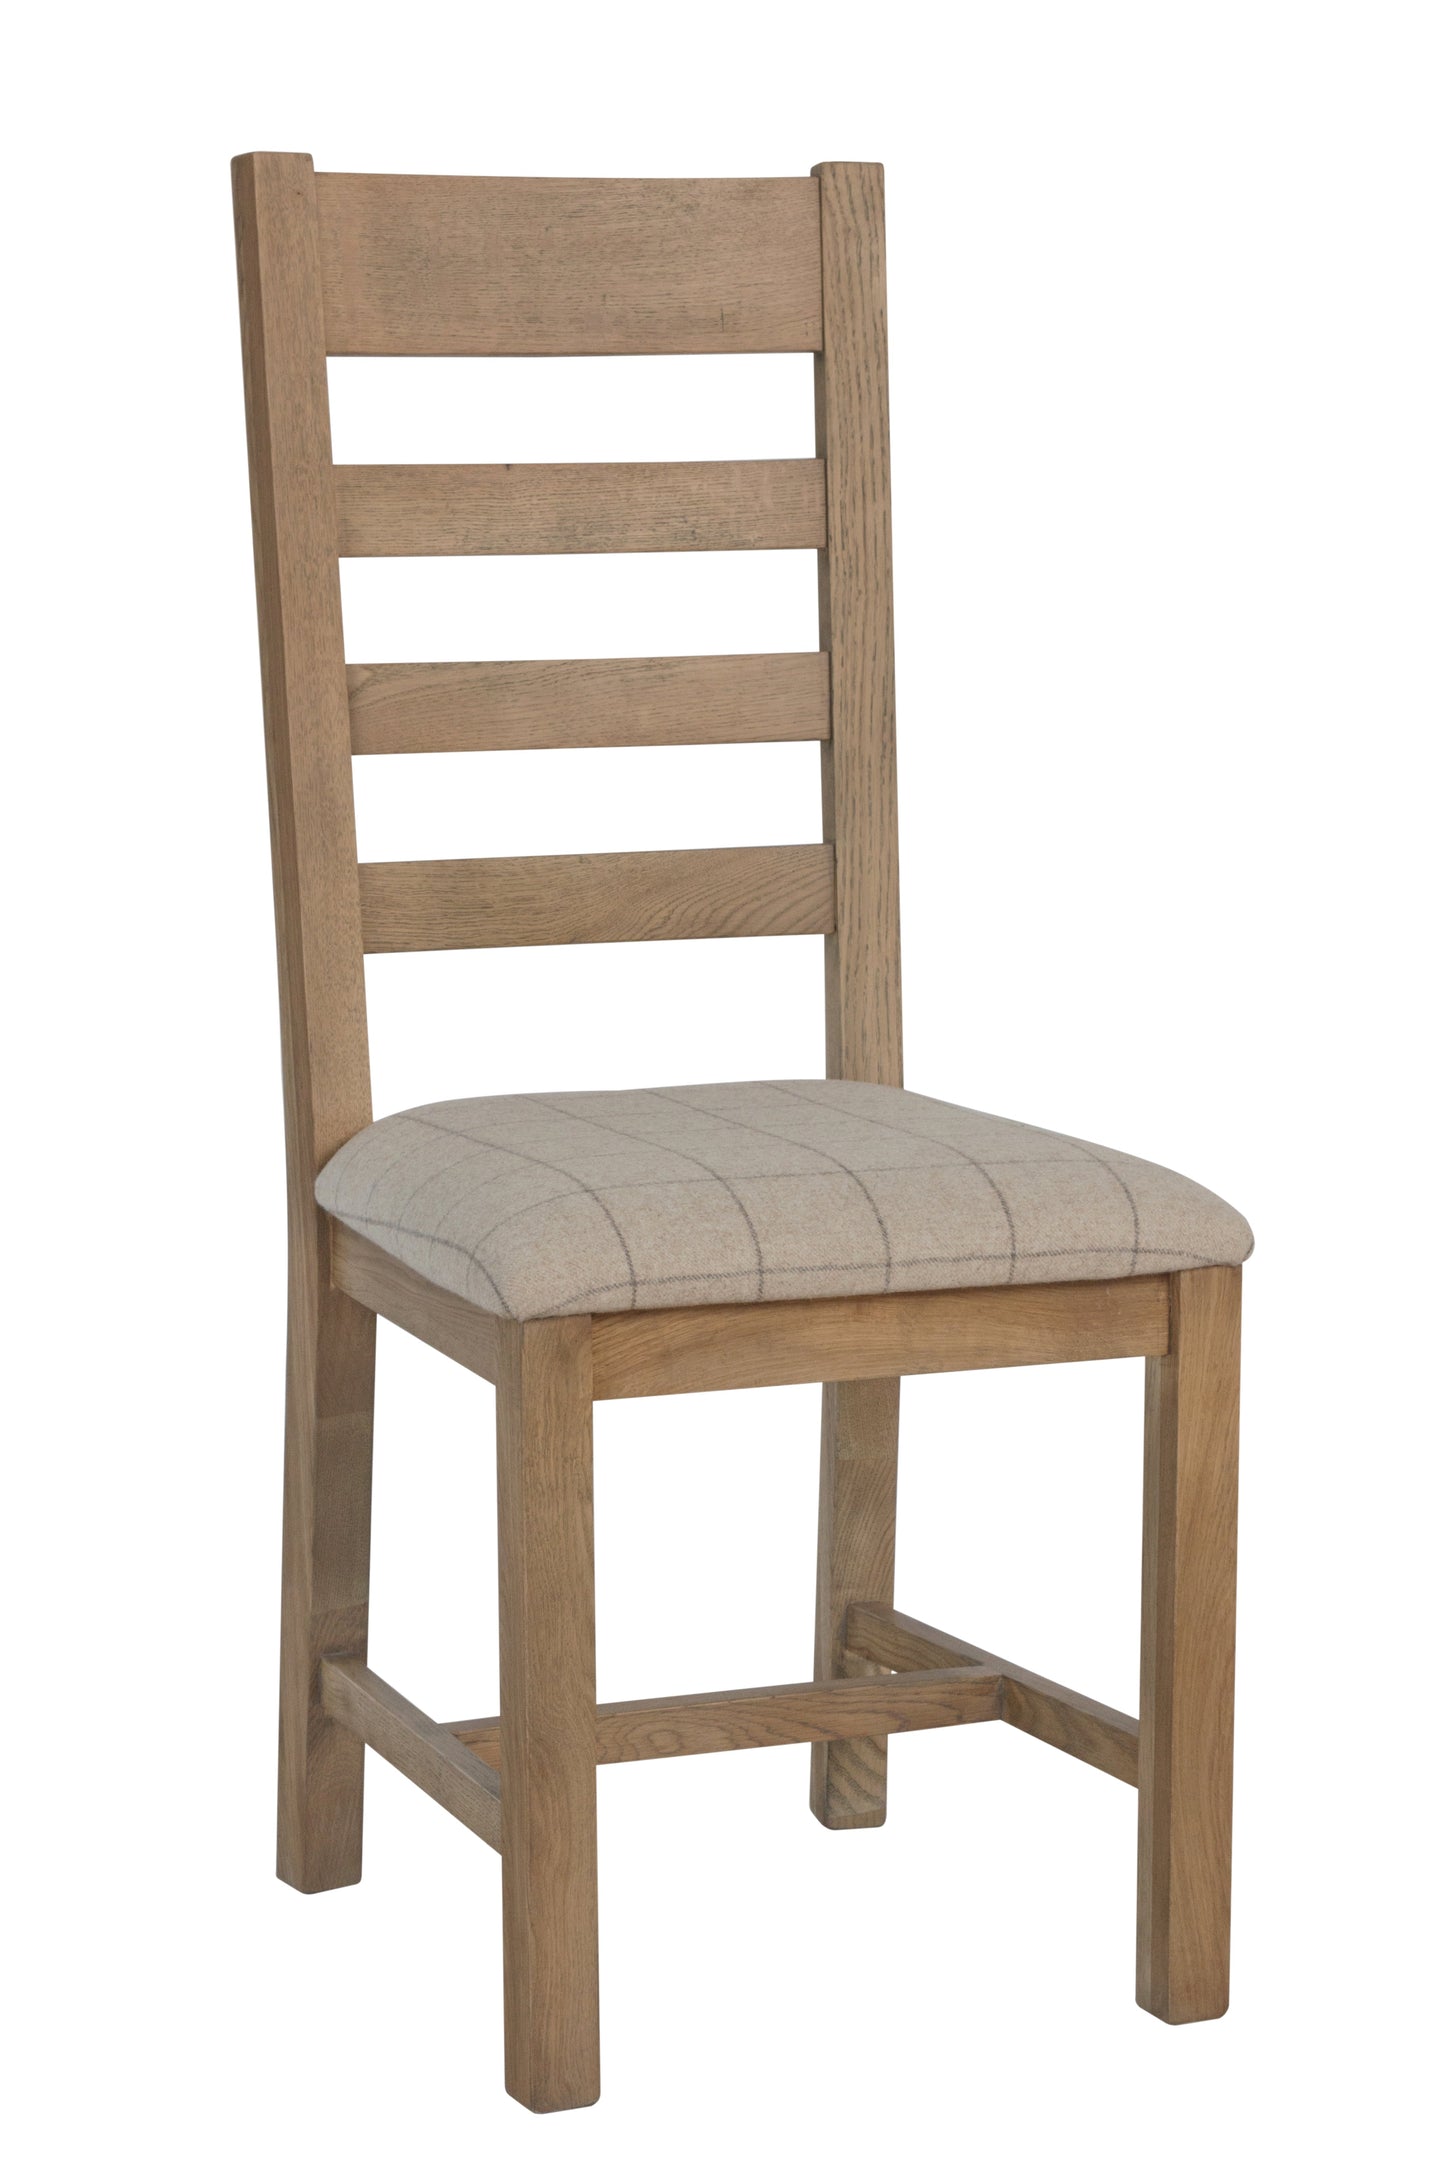 Horner Slat Back Fabric Seat Dining Chair